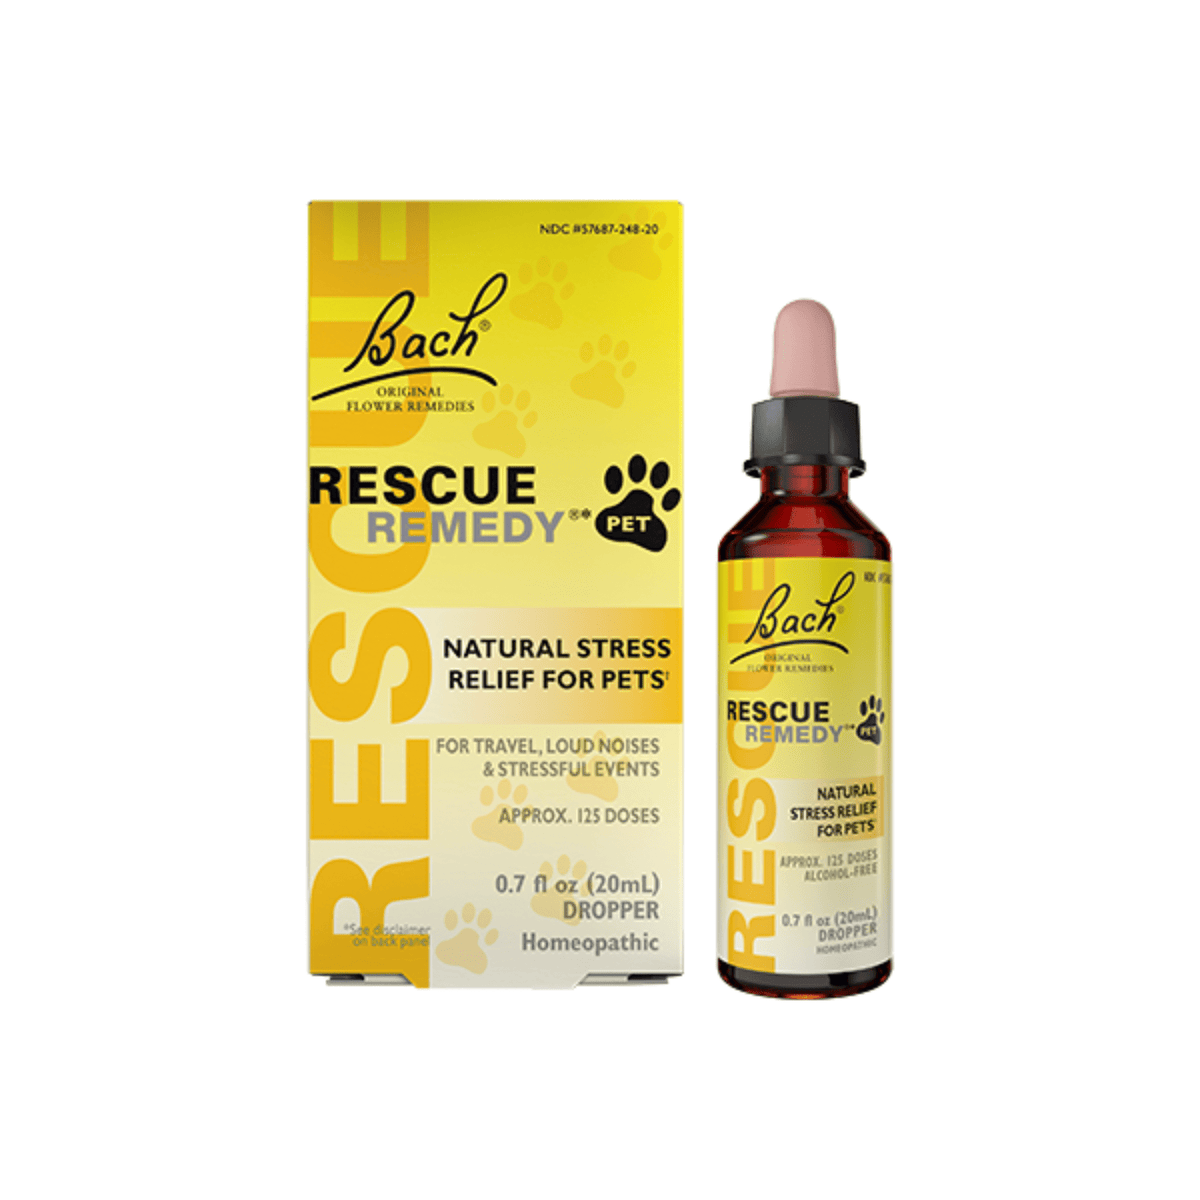 Primary Image of Rescue Remedy Pet